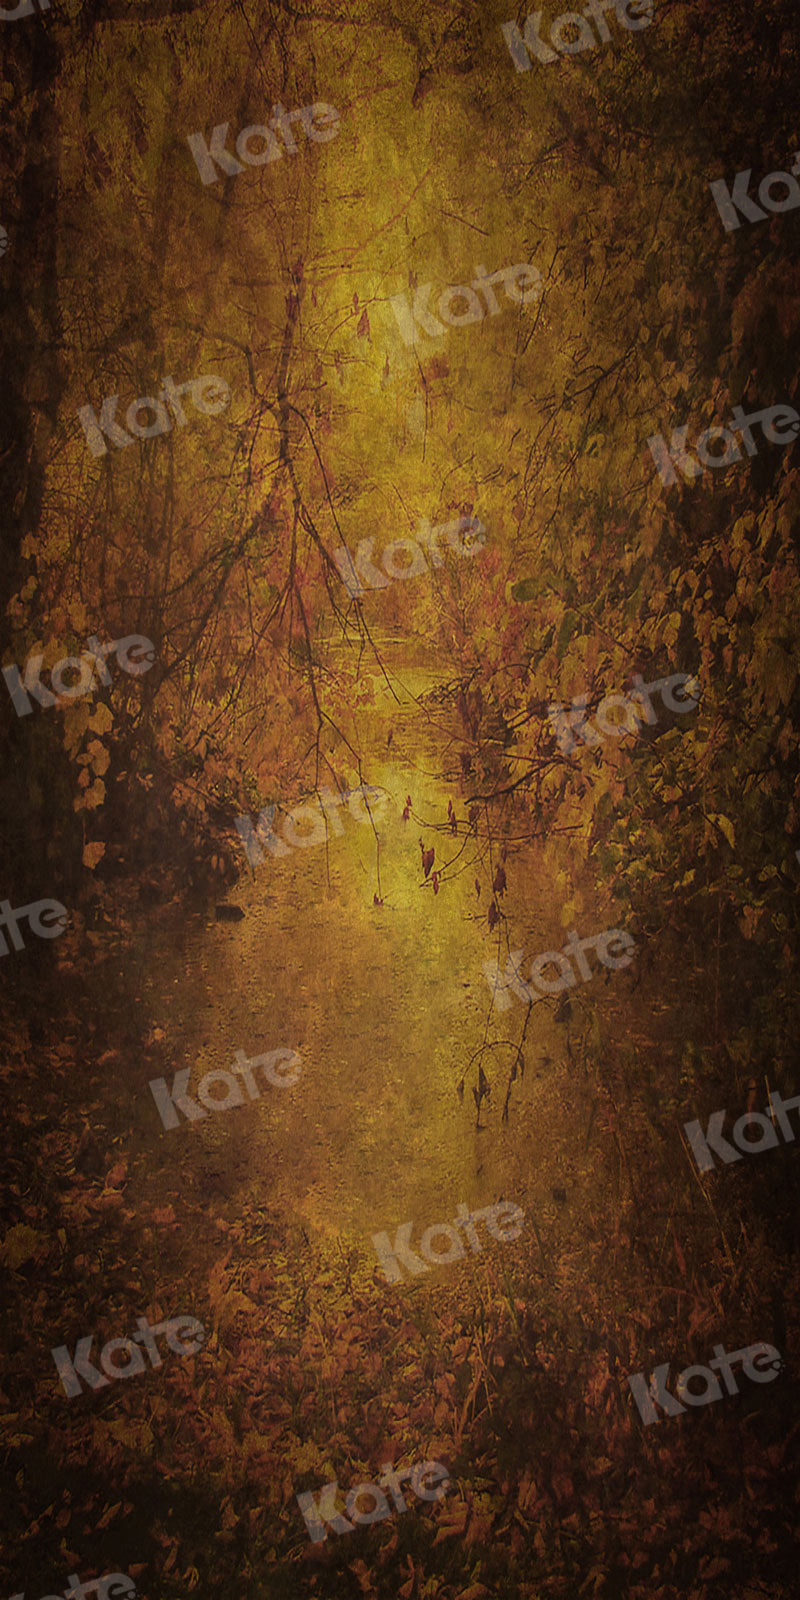 Kate Sweep Autumn Backdrop Gold Leaves Lake Oil Paingting Sunset for Photography